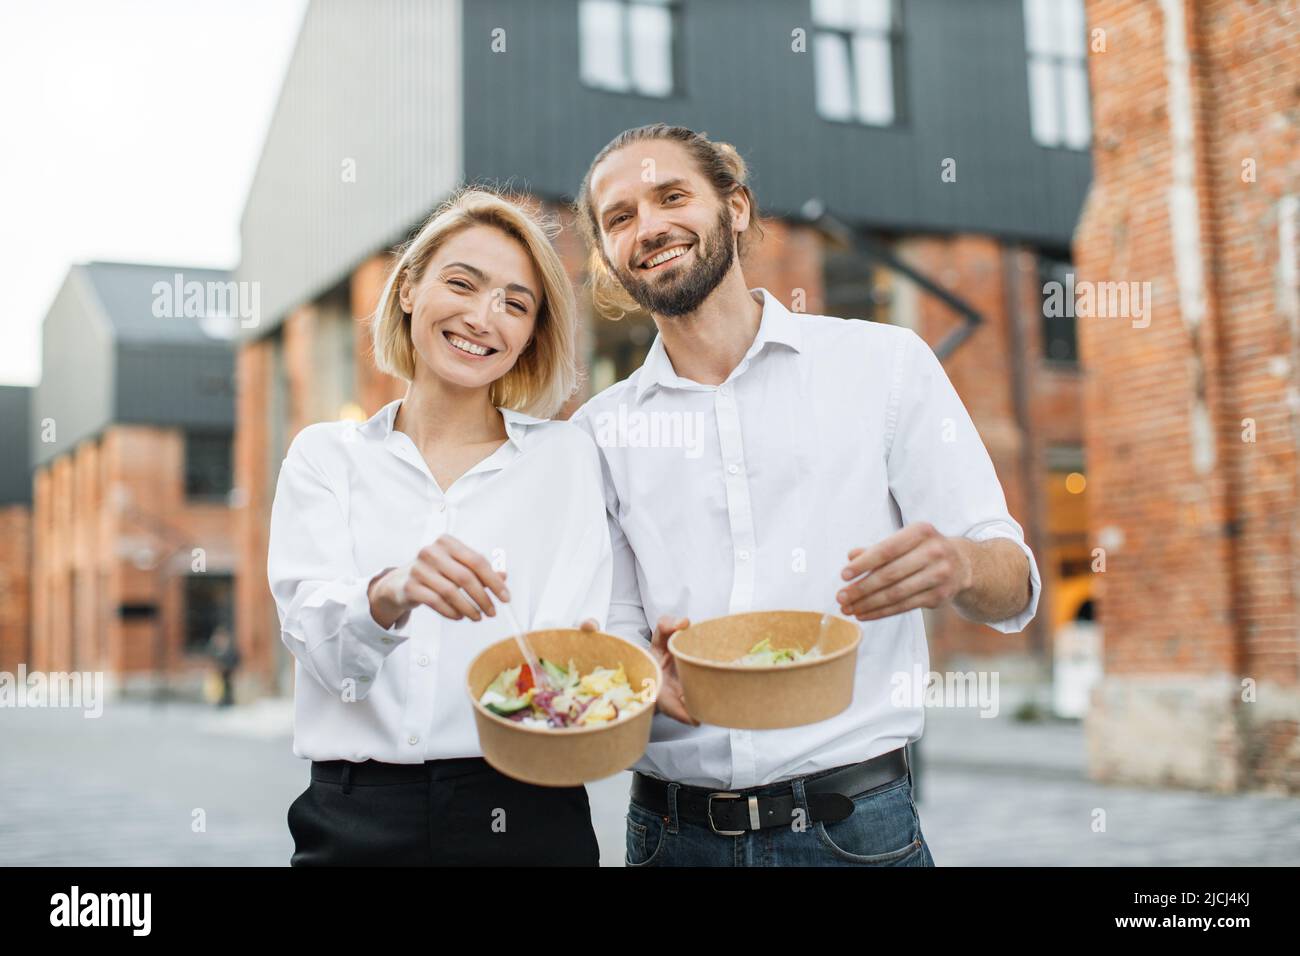 Young cheerful couple, colleague or business partners in white shirts having break and eating healthy meal walking at the city street. Organic healthy nutrition concept. Stock Photo